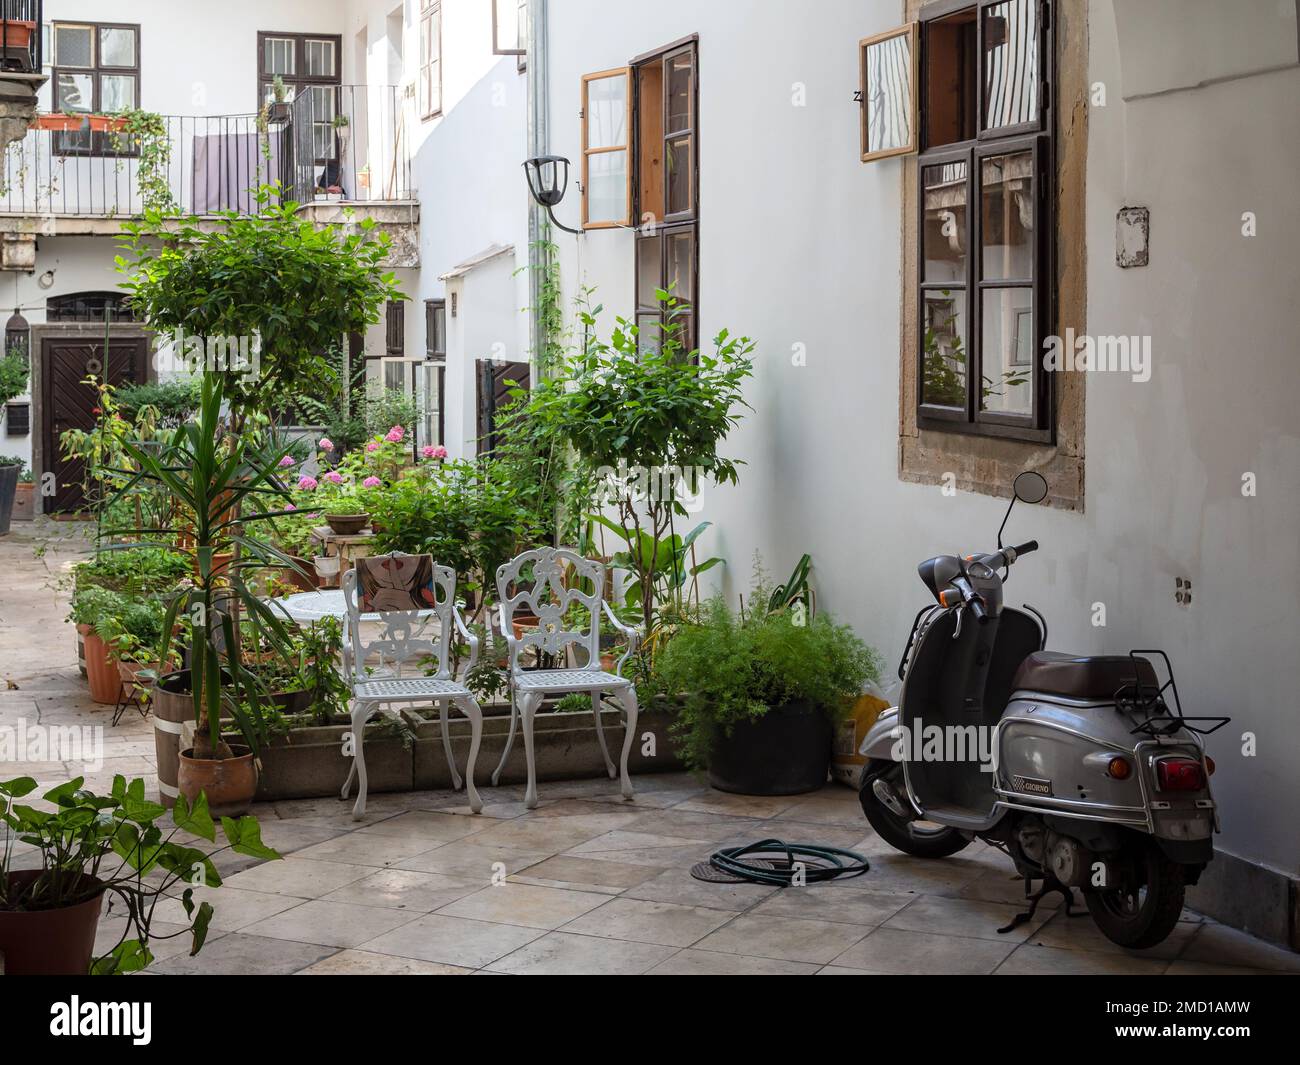 BUDAPEST, HUNGARY -  JULY 16, 2019:  Pretty courtyard scene in central Budapest Stock Photo